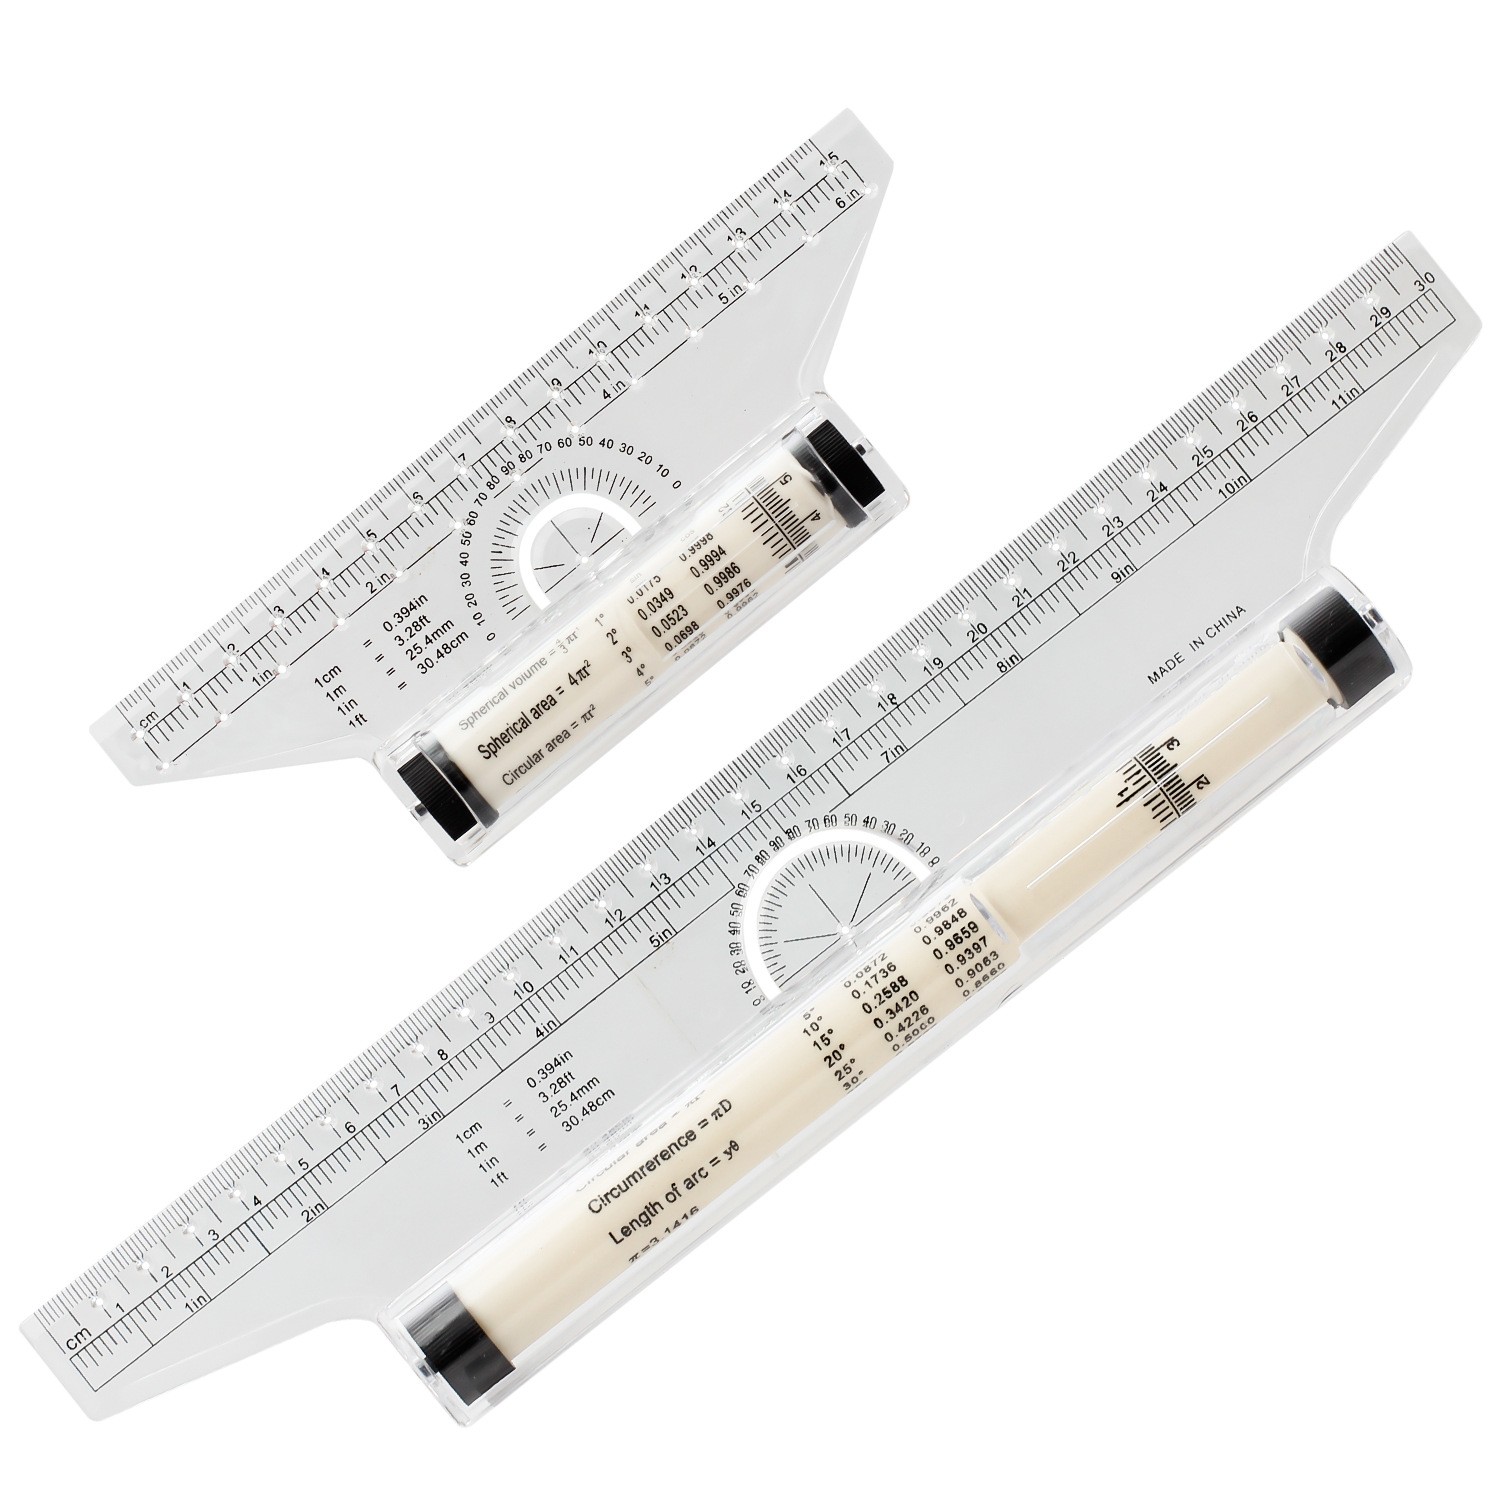 2 Pcs Biscuit Balance Baking Ruler Acrylic Rulers Rolling Pin Pastry